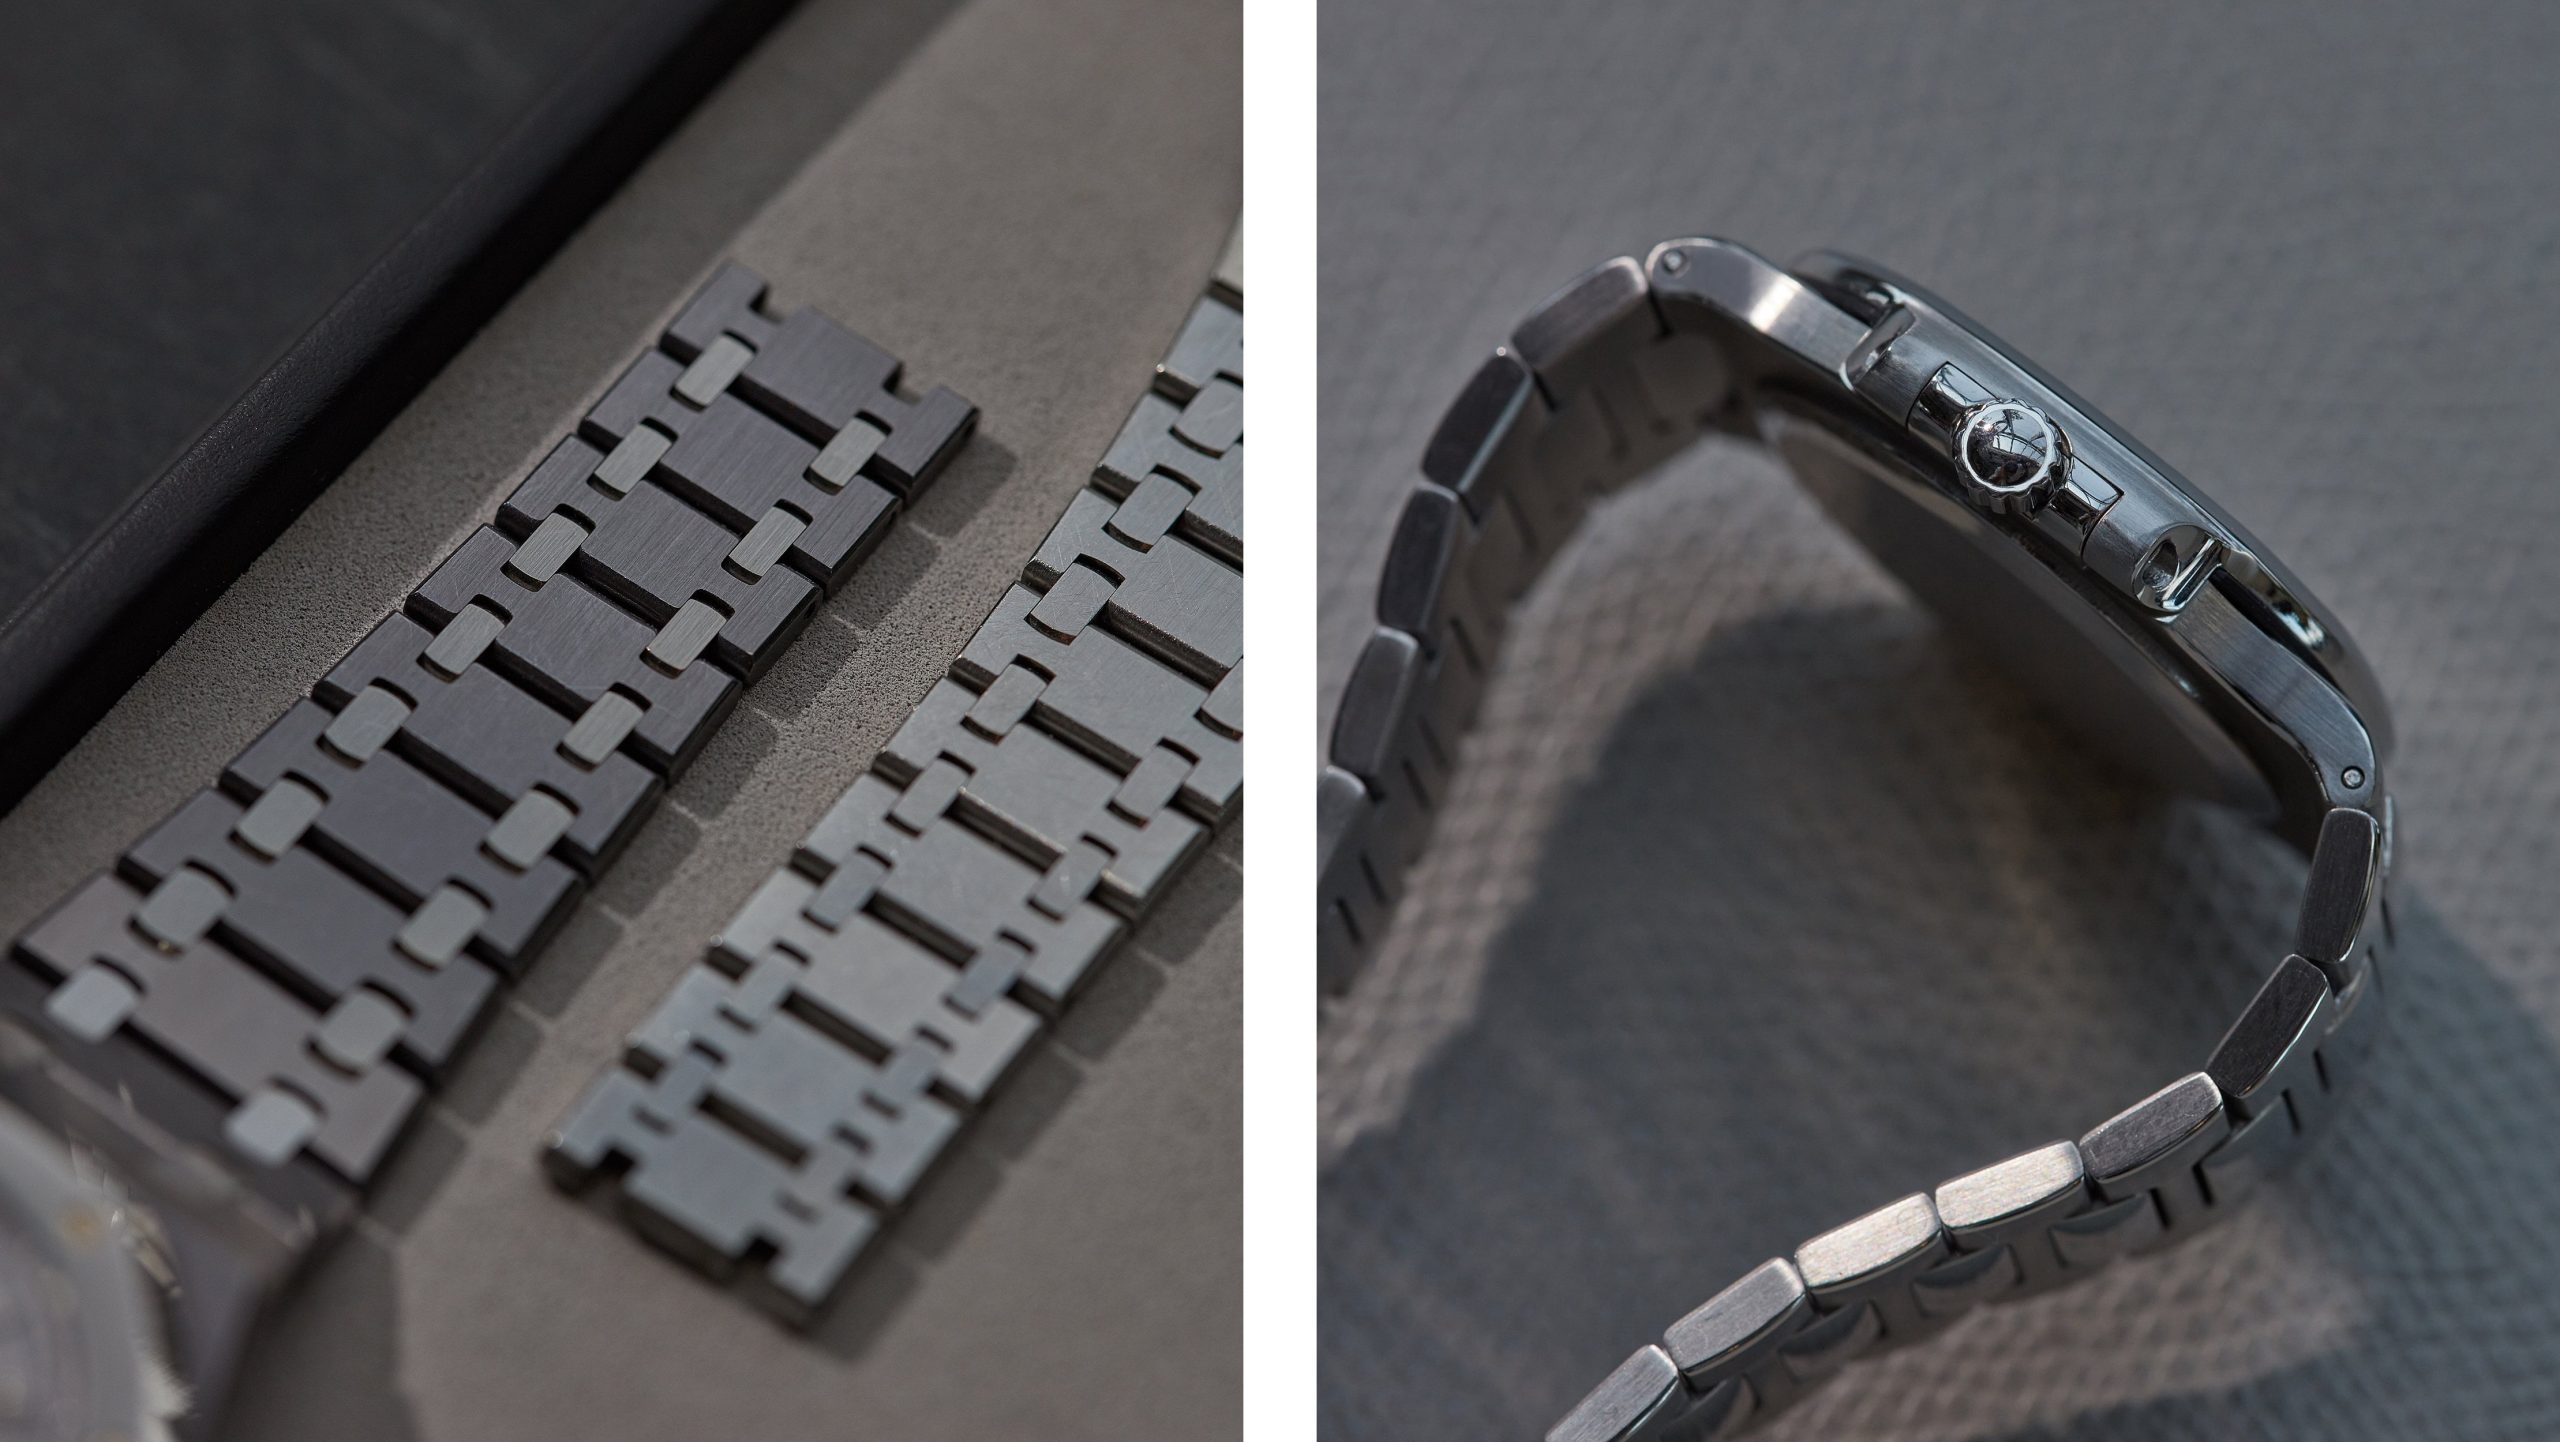 Grinding Gears: Do We Really Need This Many Steel Bracelet Sports Watches?